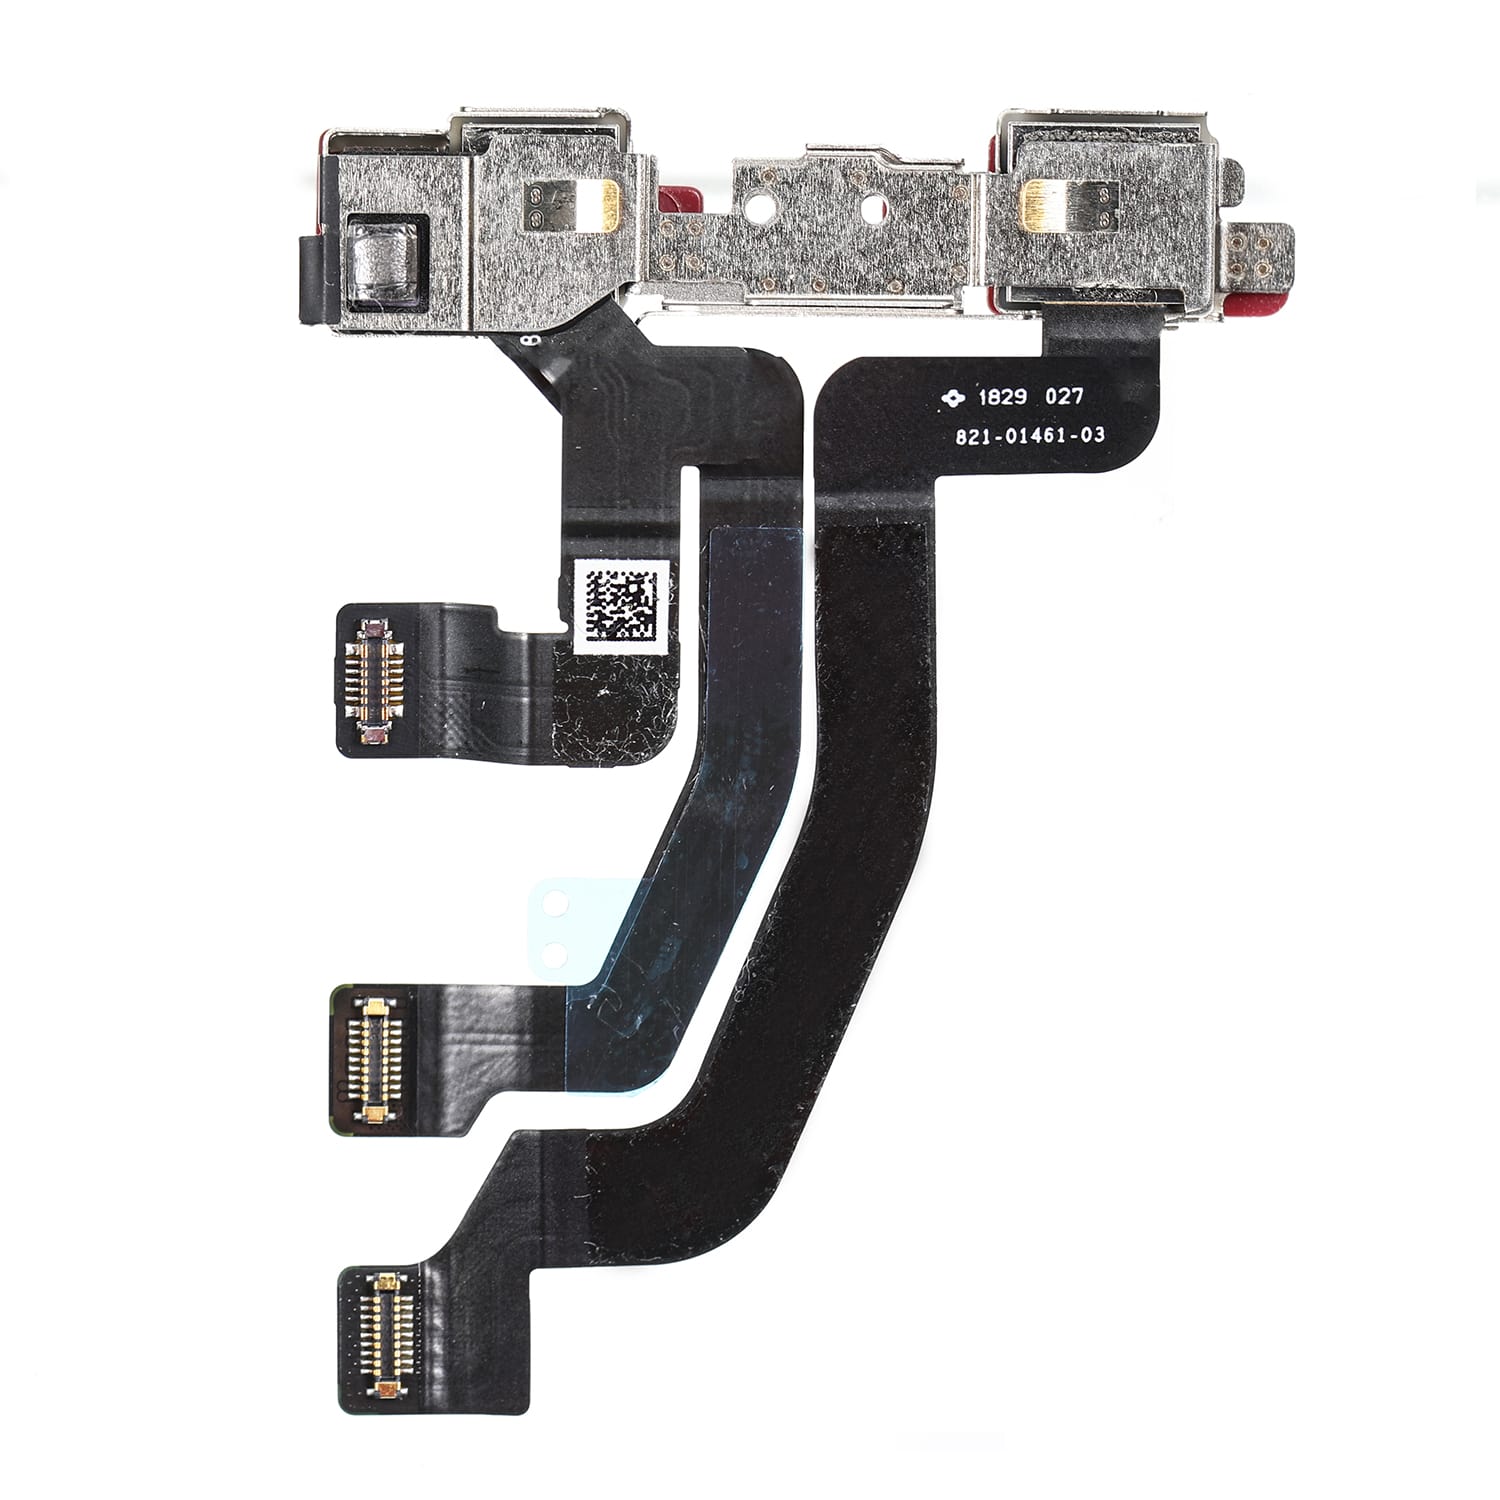 Apple iPhone XS Max Front Camera Module